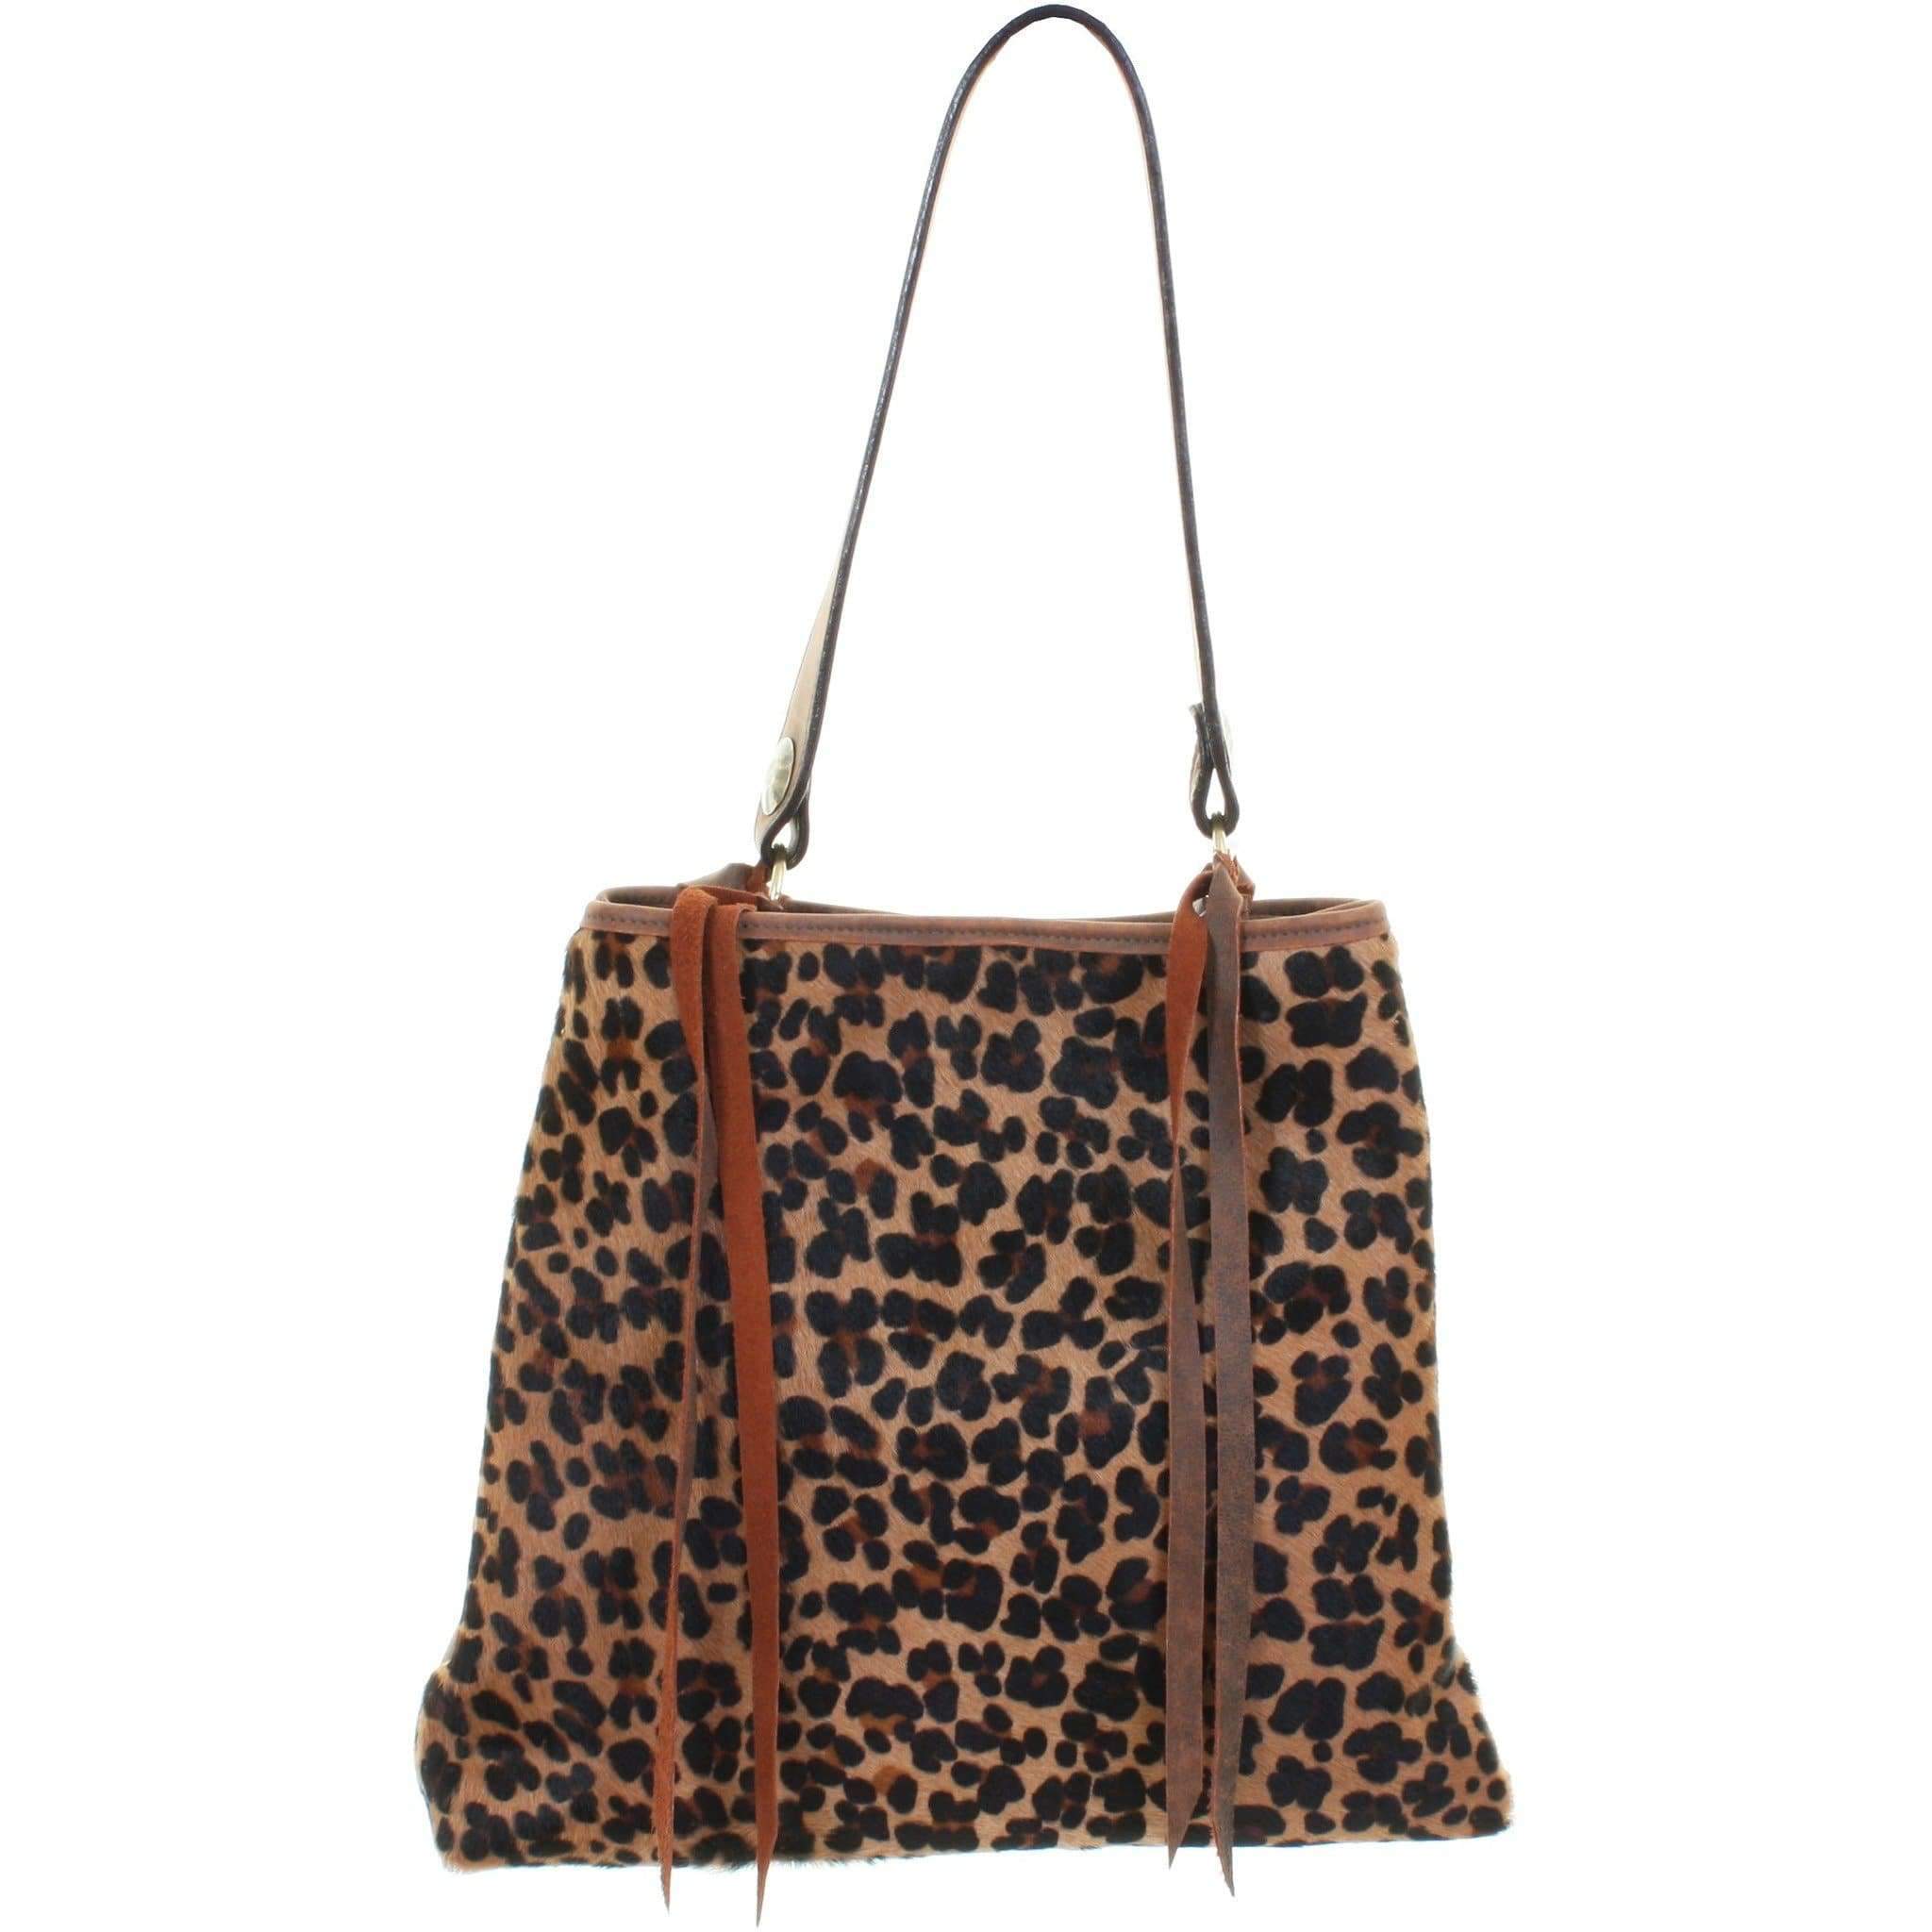 Double Sac Bretelle in Leopard, an all time fav we just brought back in  stock 😍